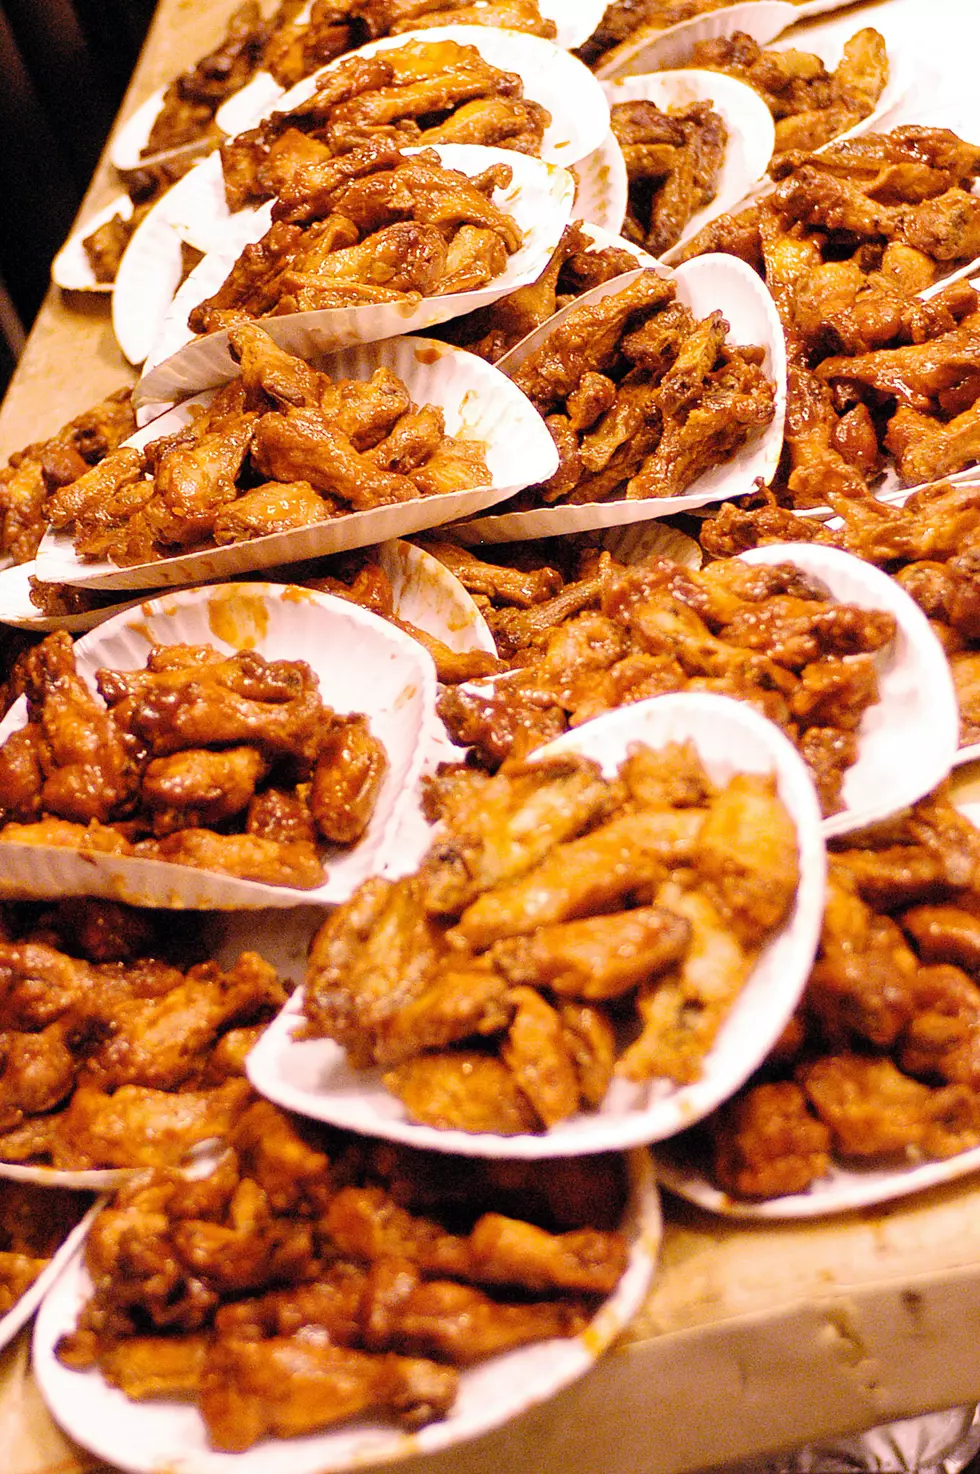 There Really is a Shortage of Chicken Wings in Upstate New York